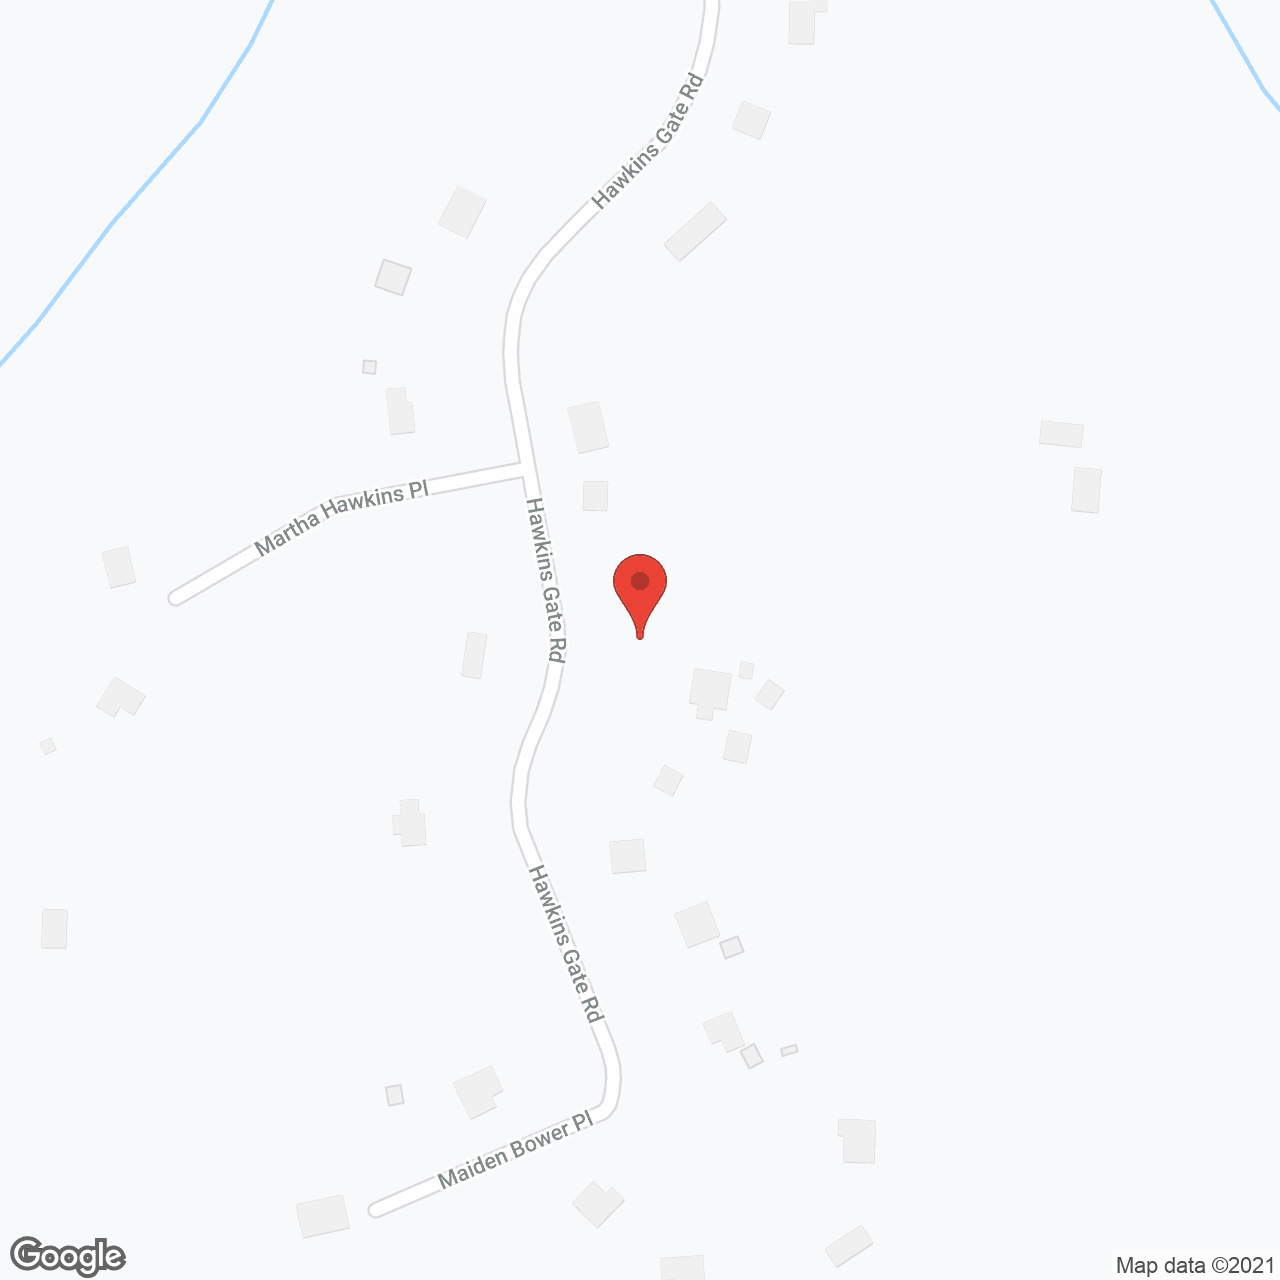 Assisted Living at Hawkins Gate in google map